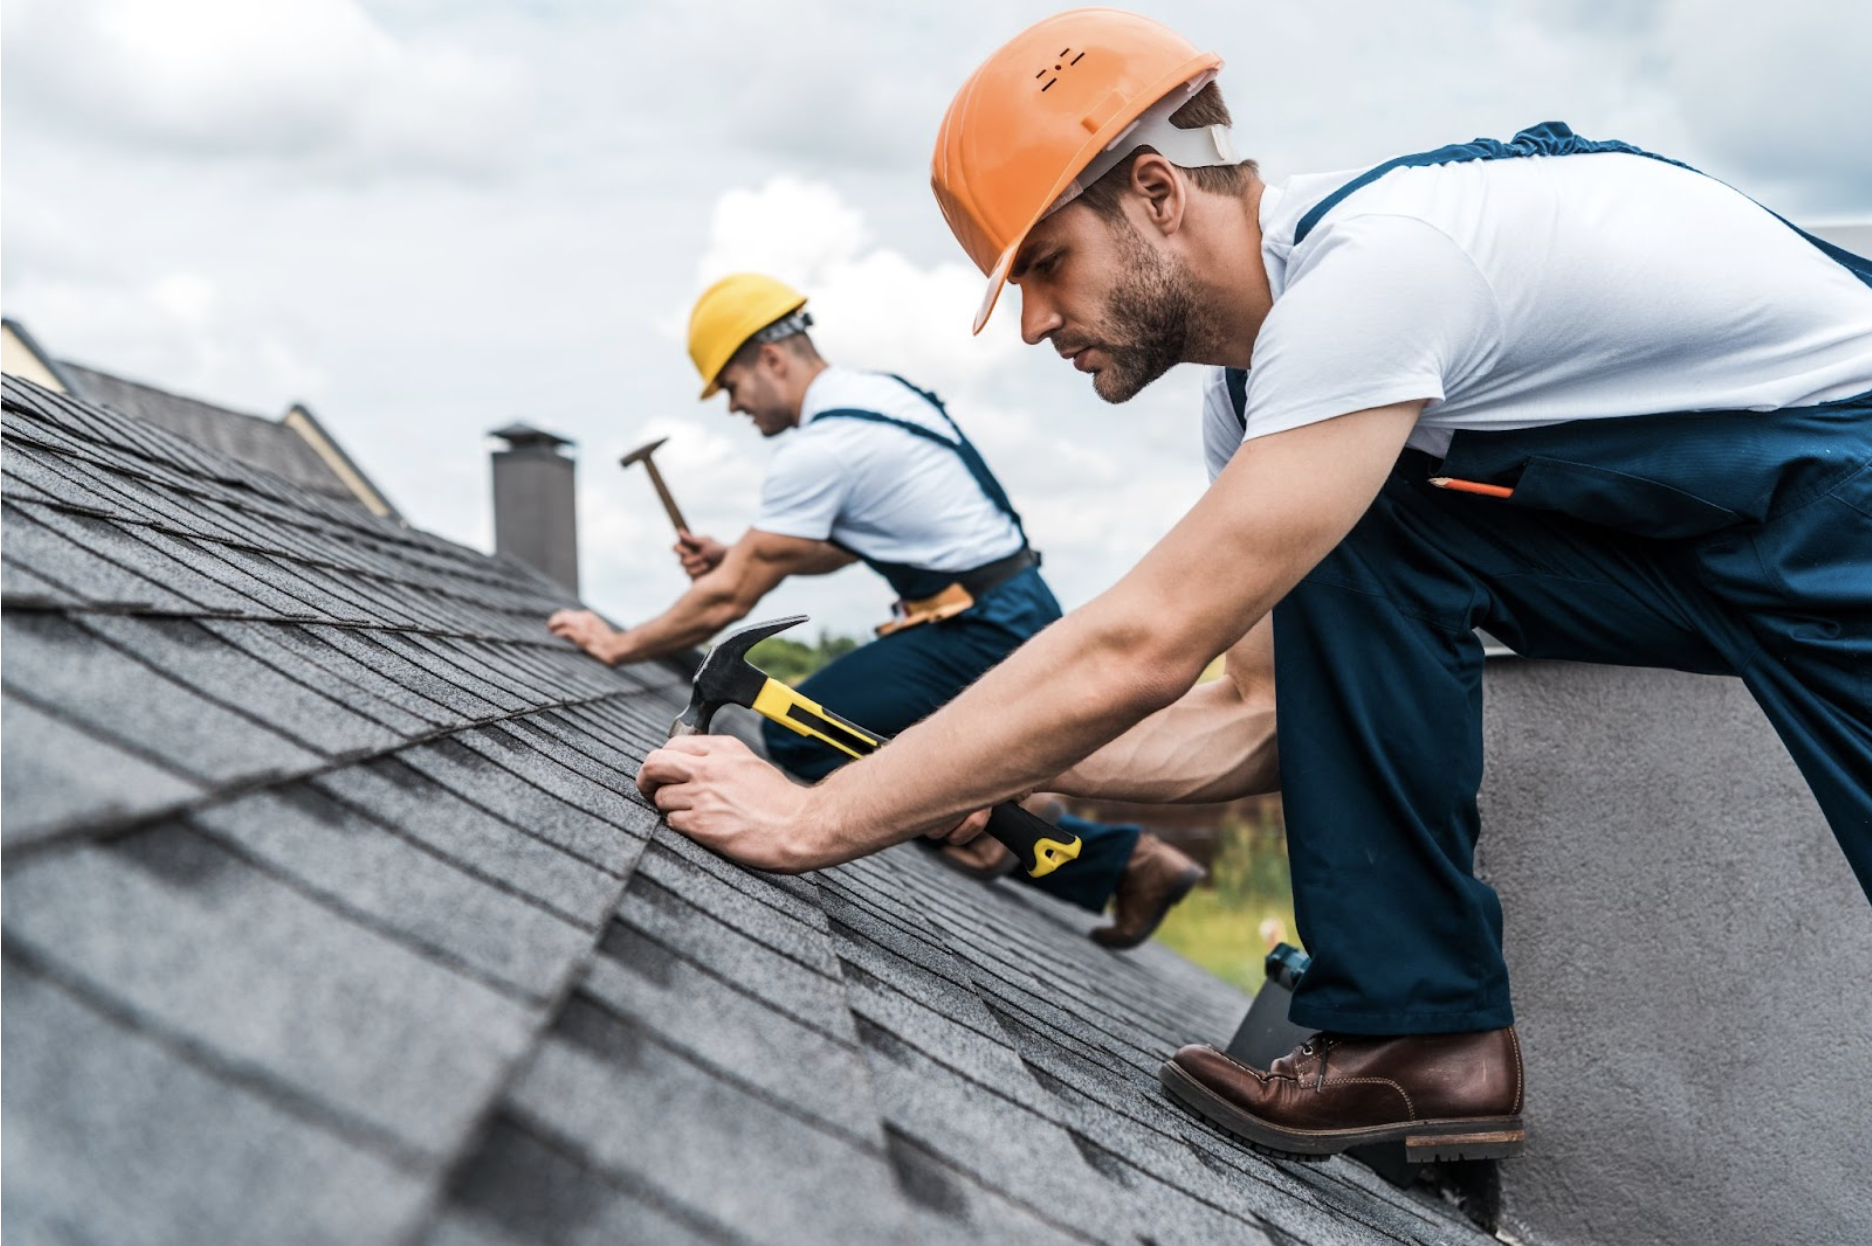 Image of roofing contractor